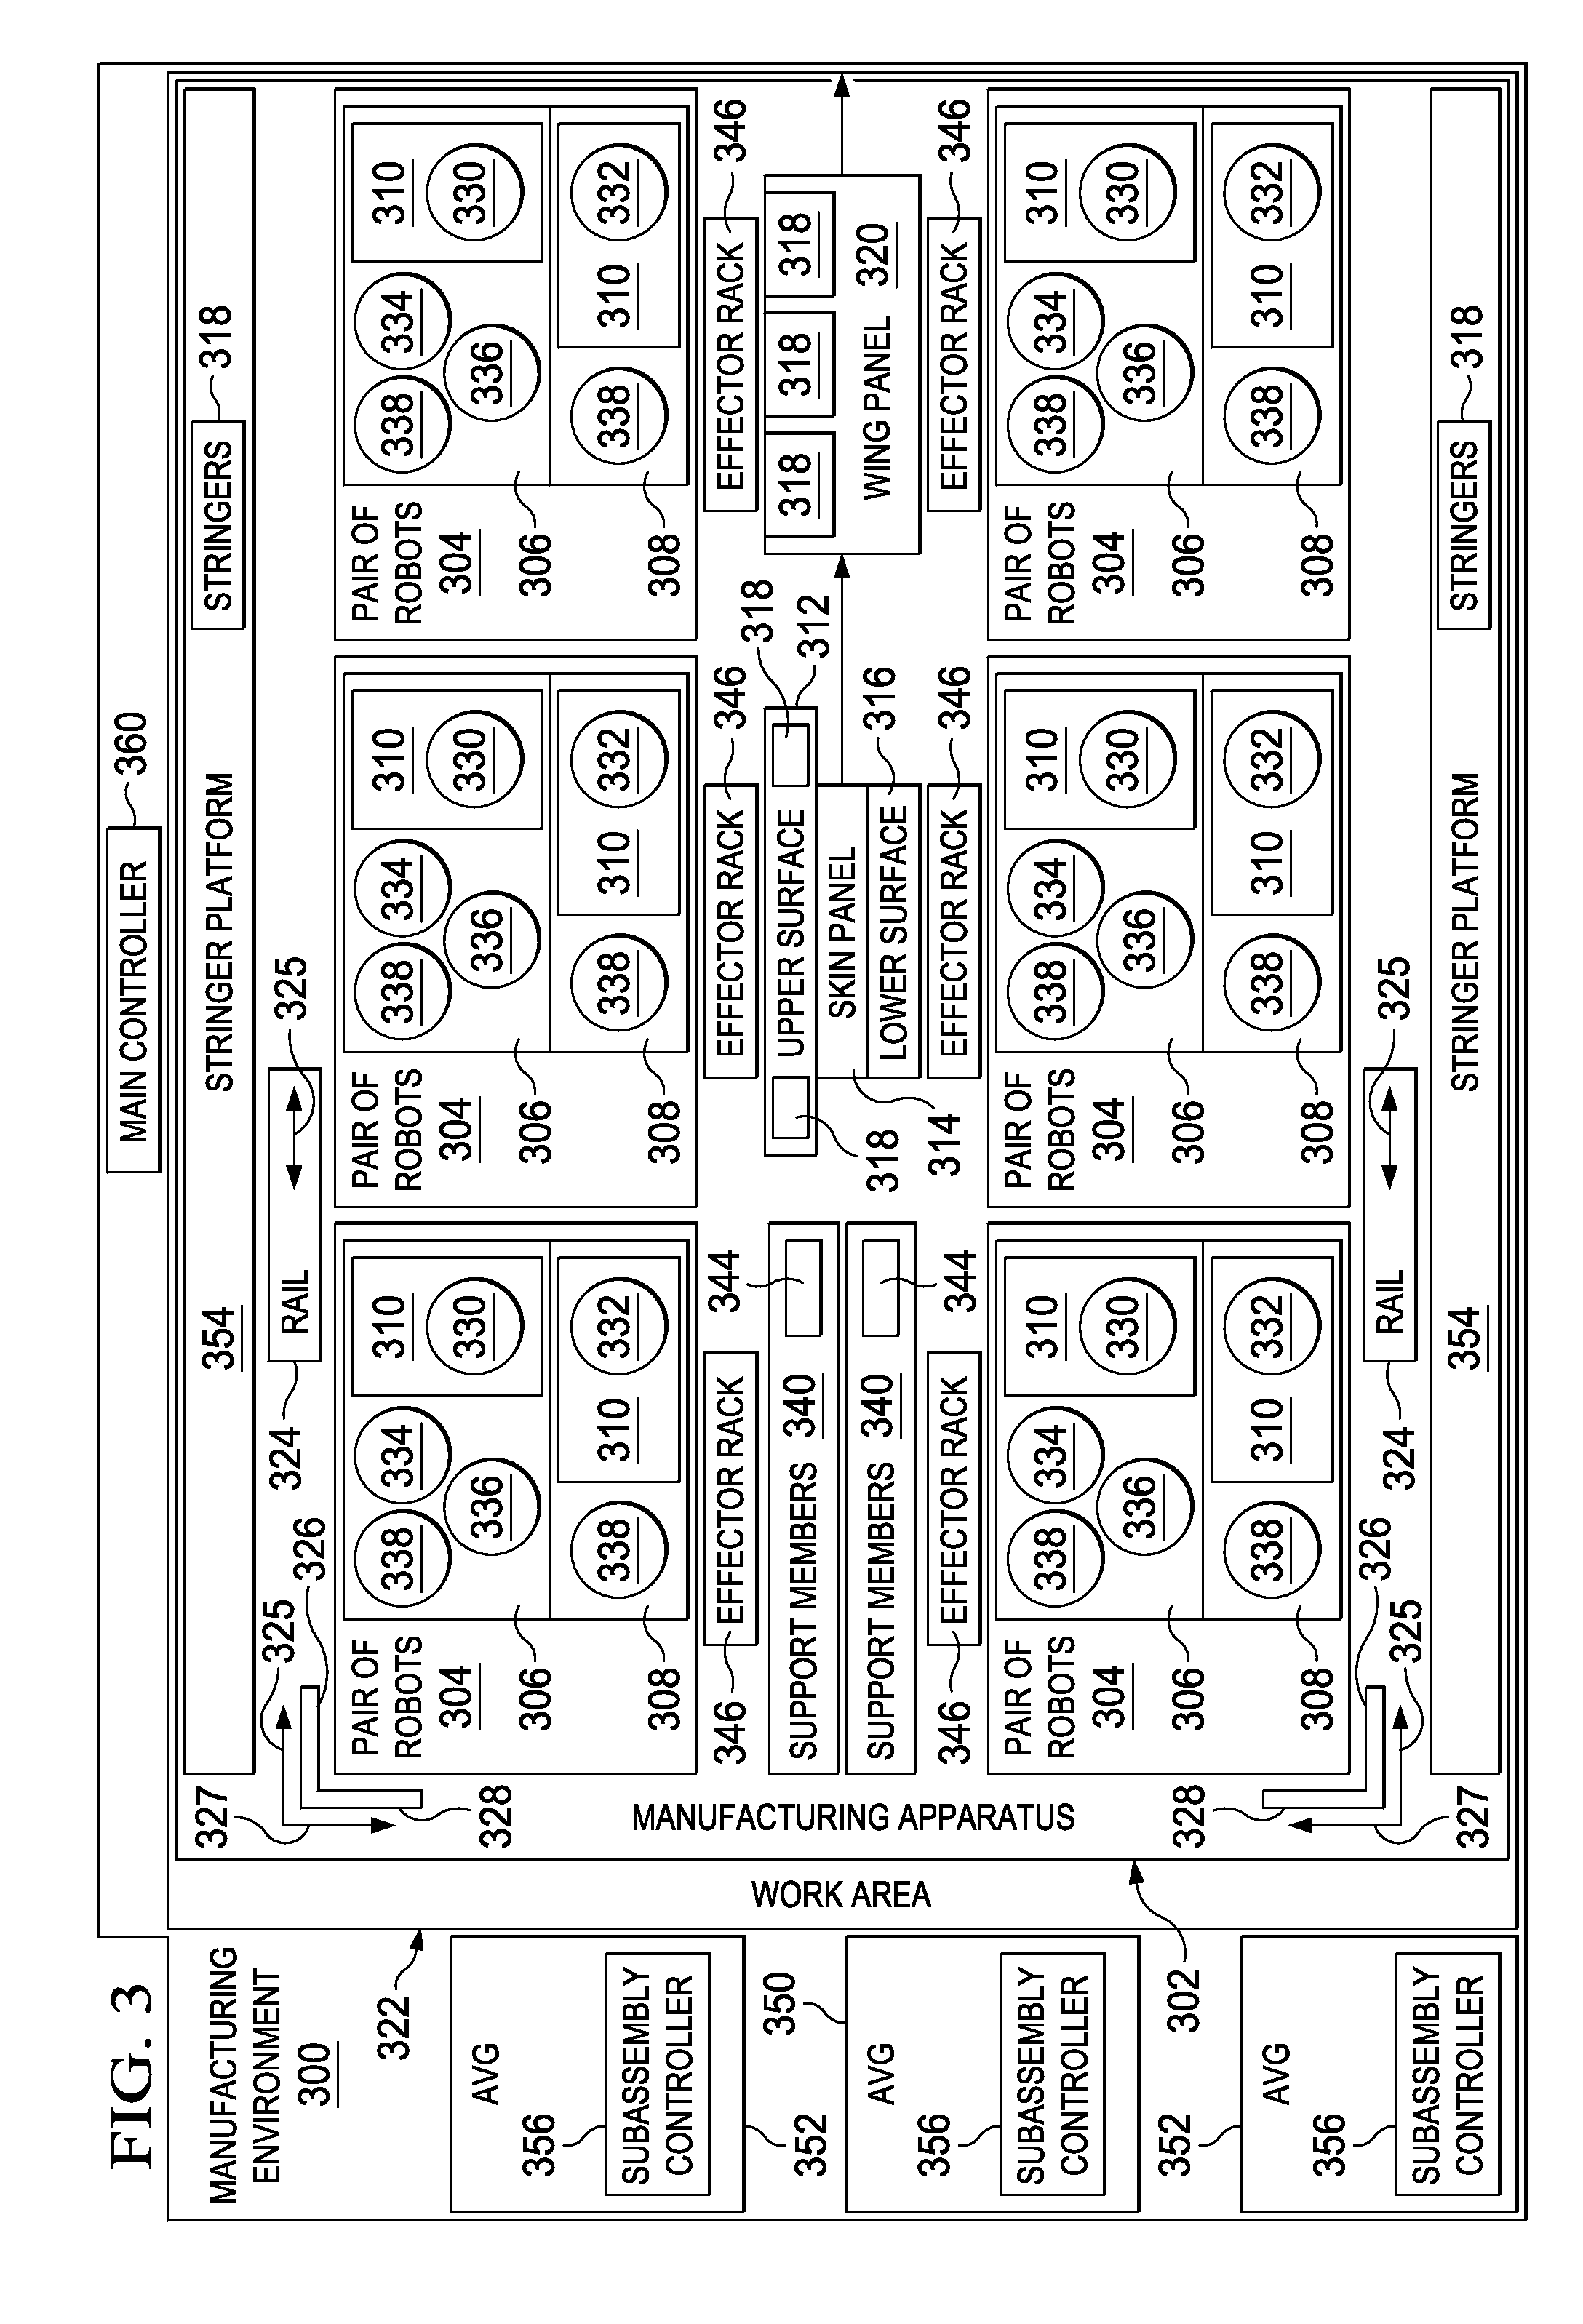 Agile manufacturing apparatus and method for high throughput